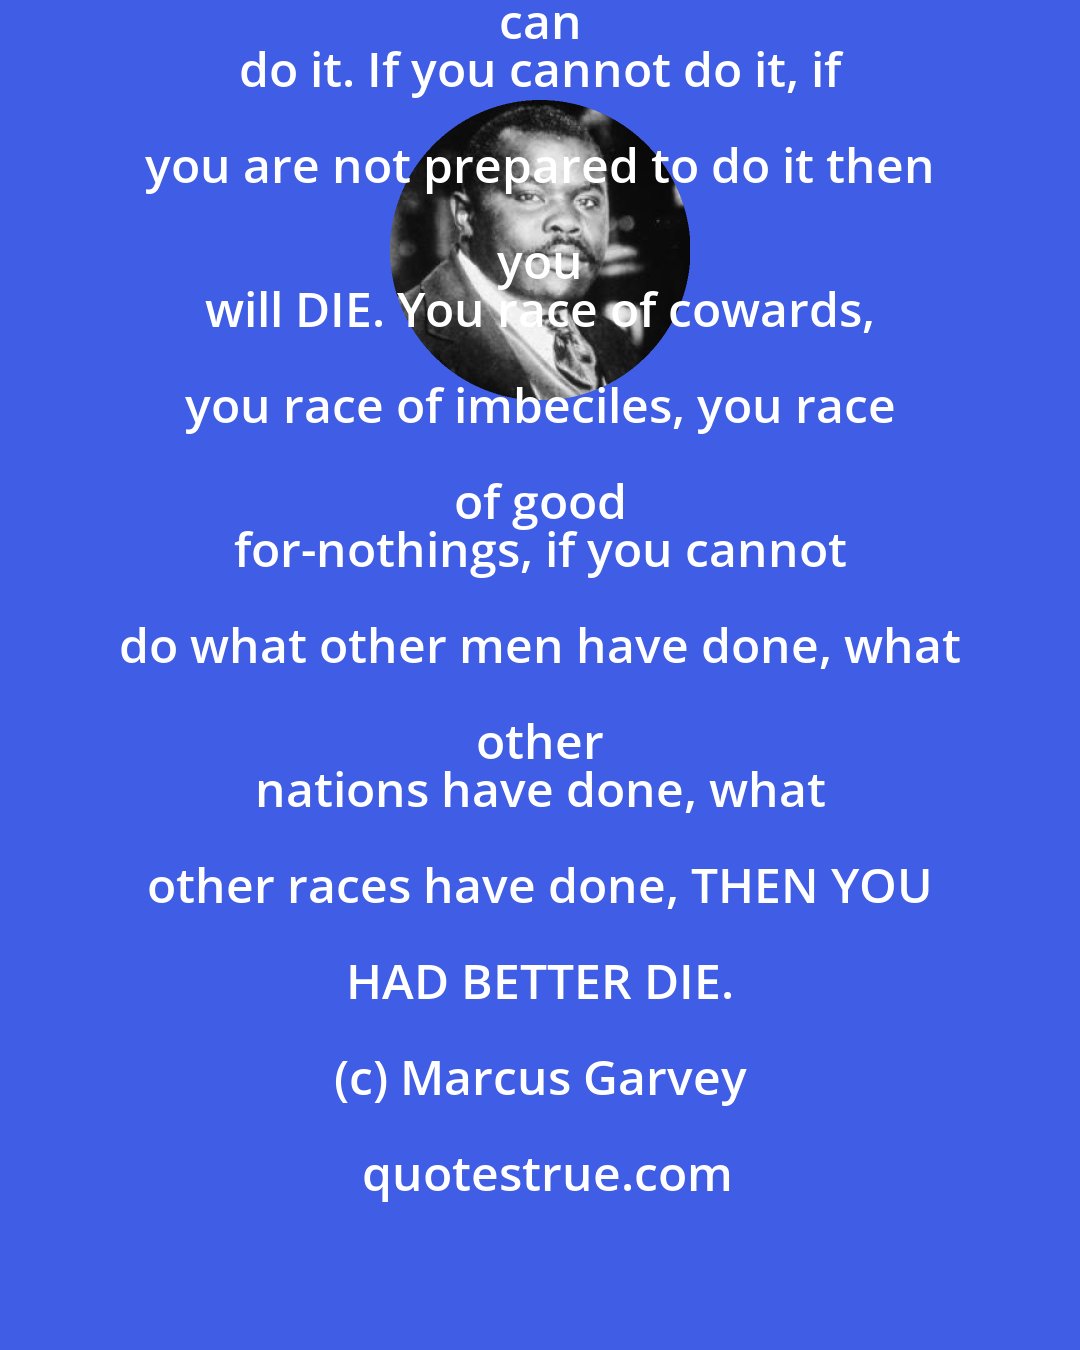 Marcus Garvey: Africa with 400 million Black People can 
 do it. If you cannot do it, if you are not prepared to do it then you 
 will DIE. You race of cowards, you race of imbeciles, you race of good 
 for-nothings, if you cannot do what other men have done, what other 
 nations have done, what other races have done, THEN YOU HAD BETTER DIE.